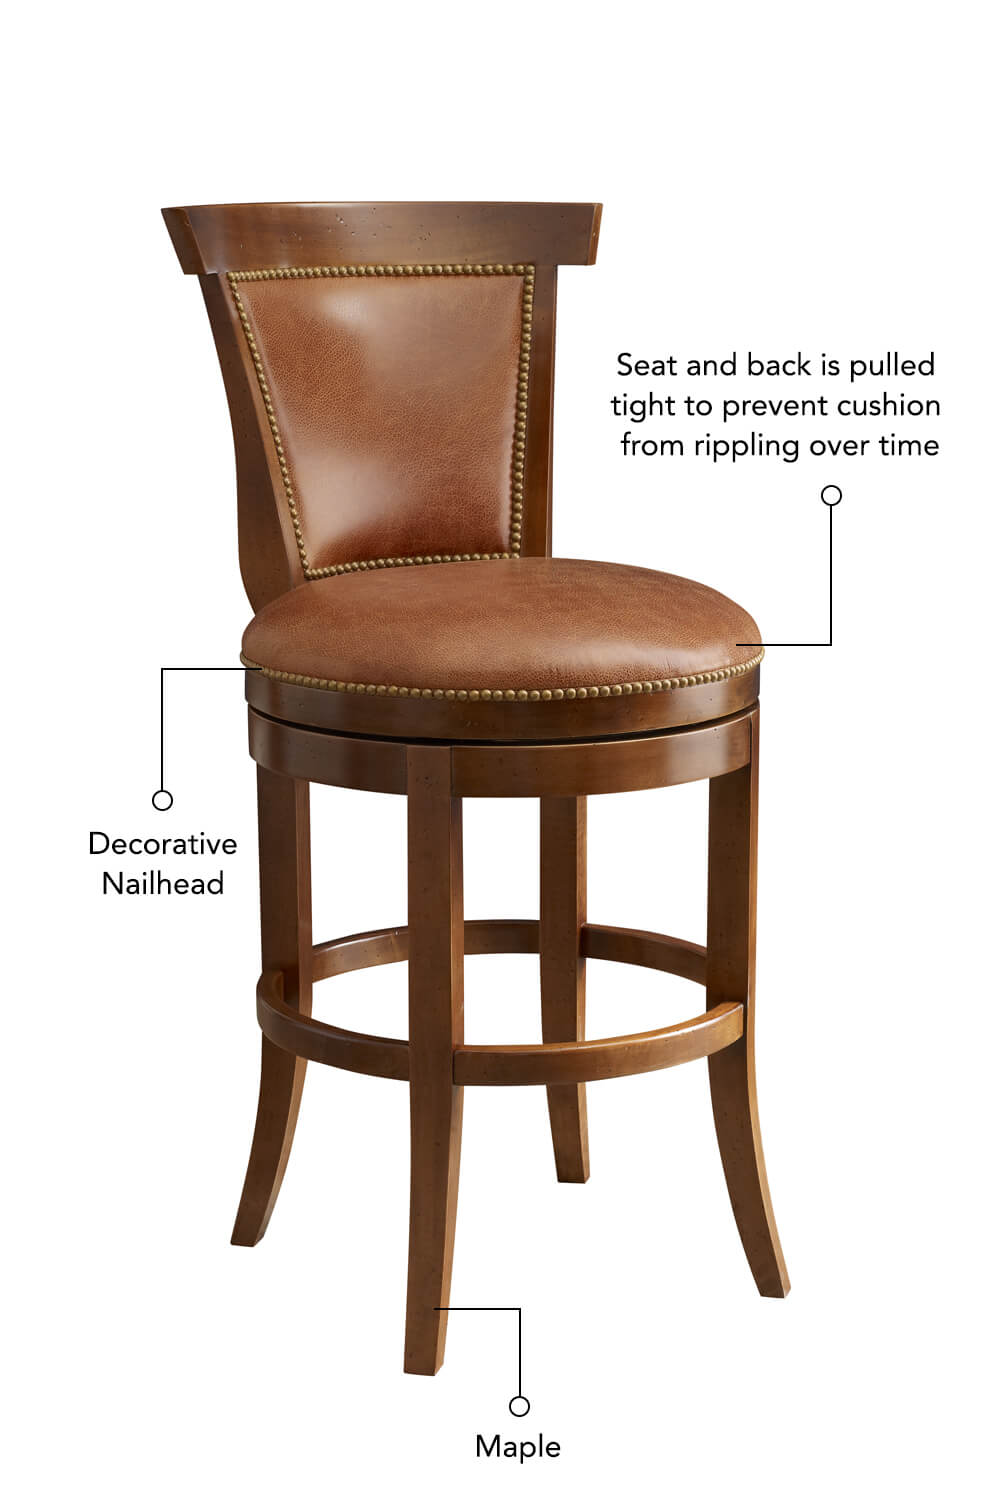 Features decorative nailhead trim outlining the seat and back, maple wood base, and pulled seat and back cushion.